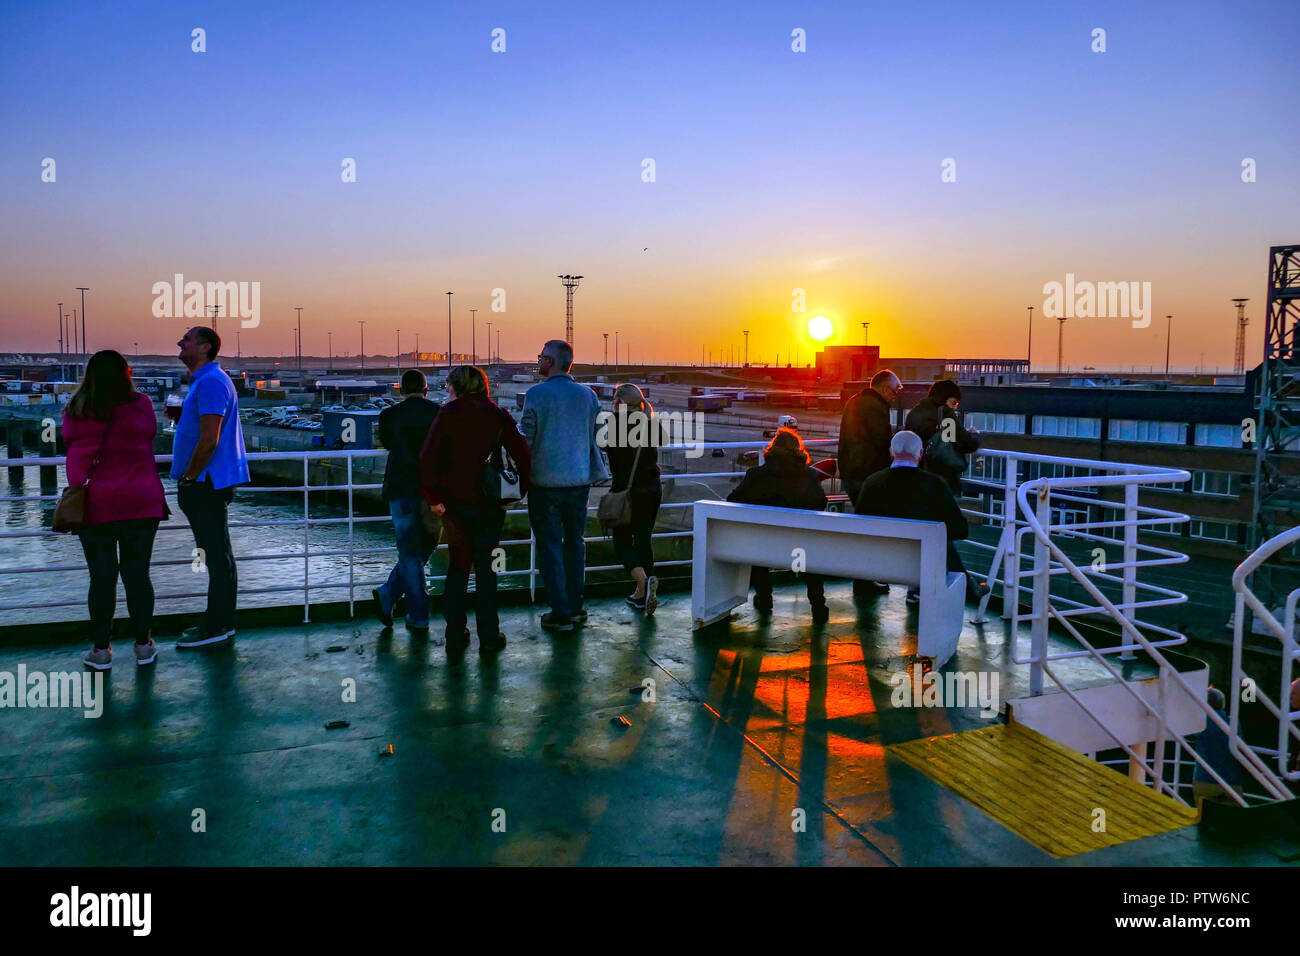 Passengers on the deck of Pride of Hull The port seen from a ferry at sundown, Zeebrugge port, Belgium, Stock Photo